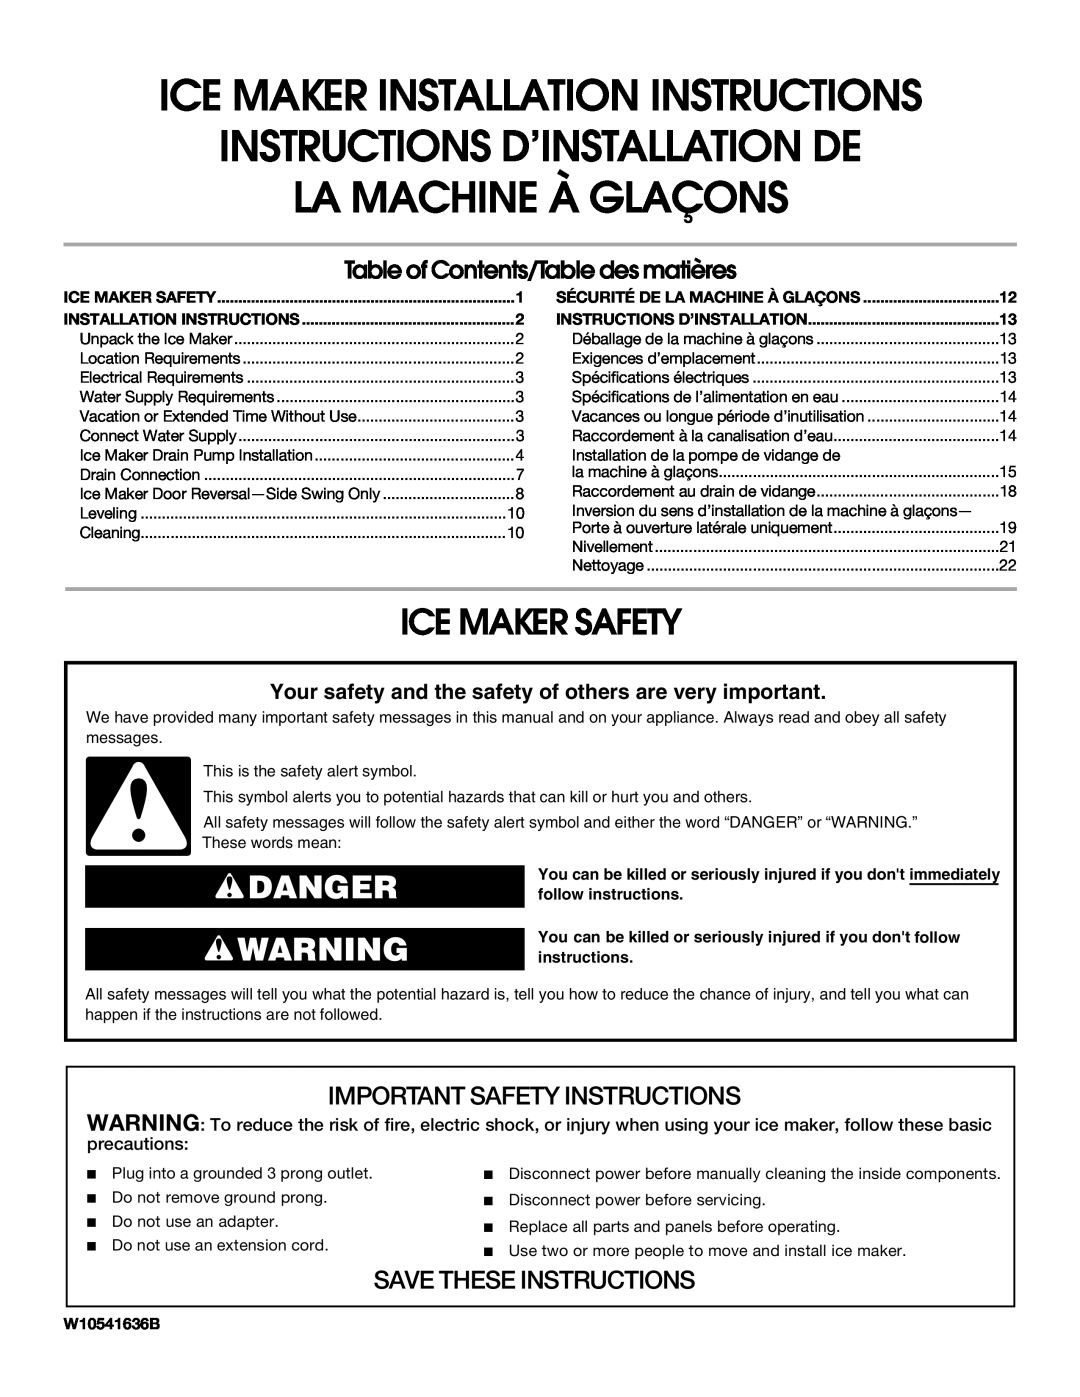 Whirlpool W10541636B important safety instructions Ice Maker Safety, Danger, Table of Contents/Table des matières 